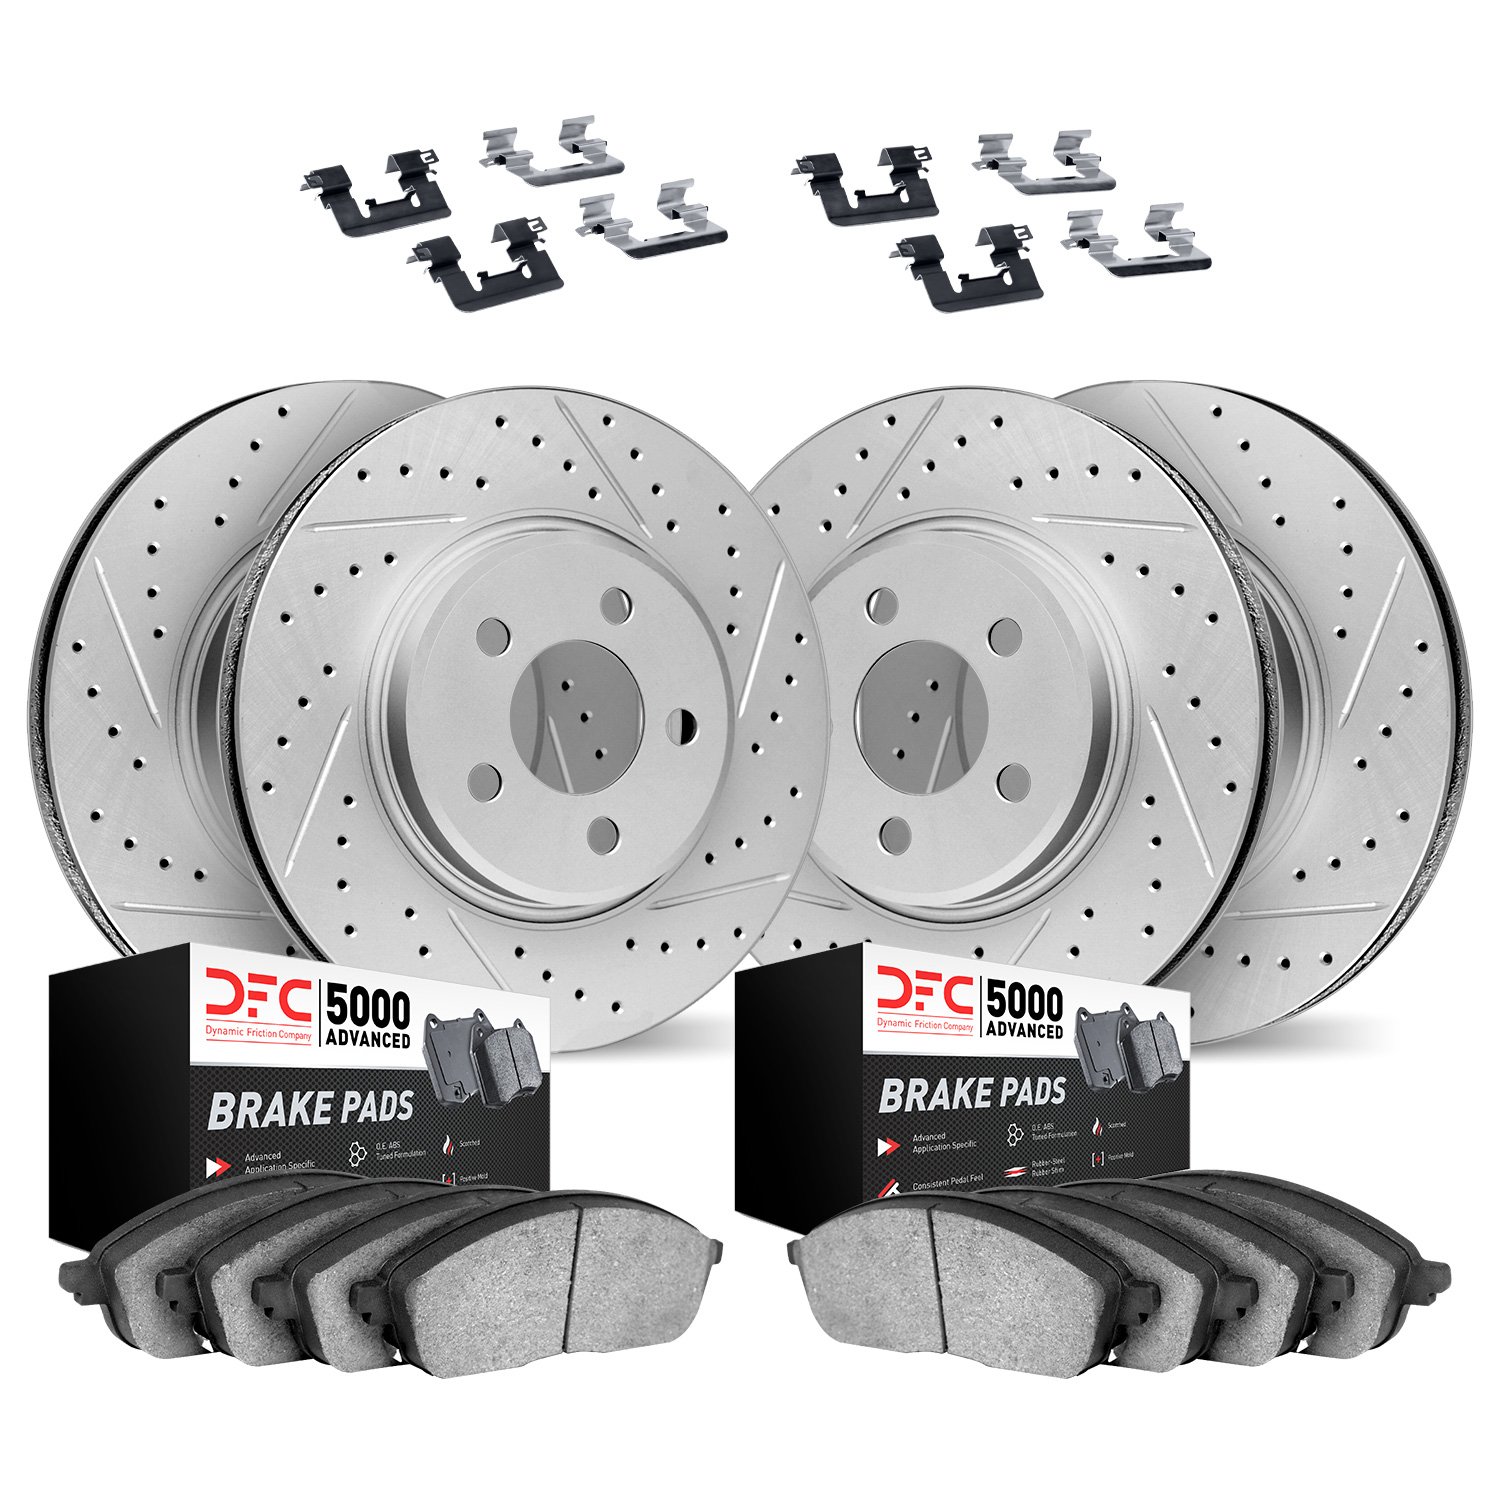 2514-11008 Geoperformance Drilled/Slotted Rotors w/5000 Advanced Brake Pads Kit & Hardware, 2005-2009 Land Rover, Position: Fron